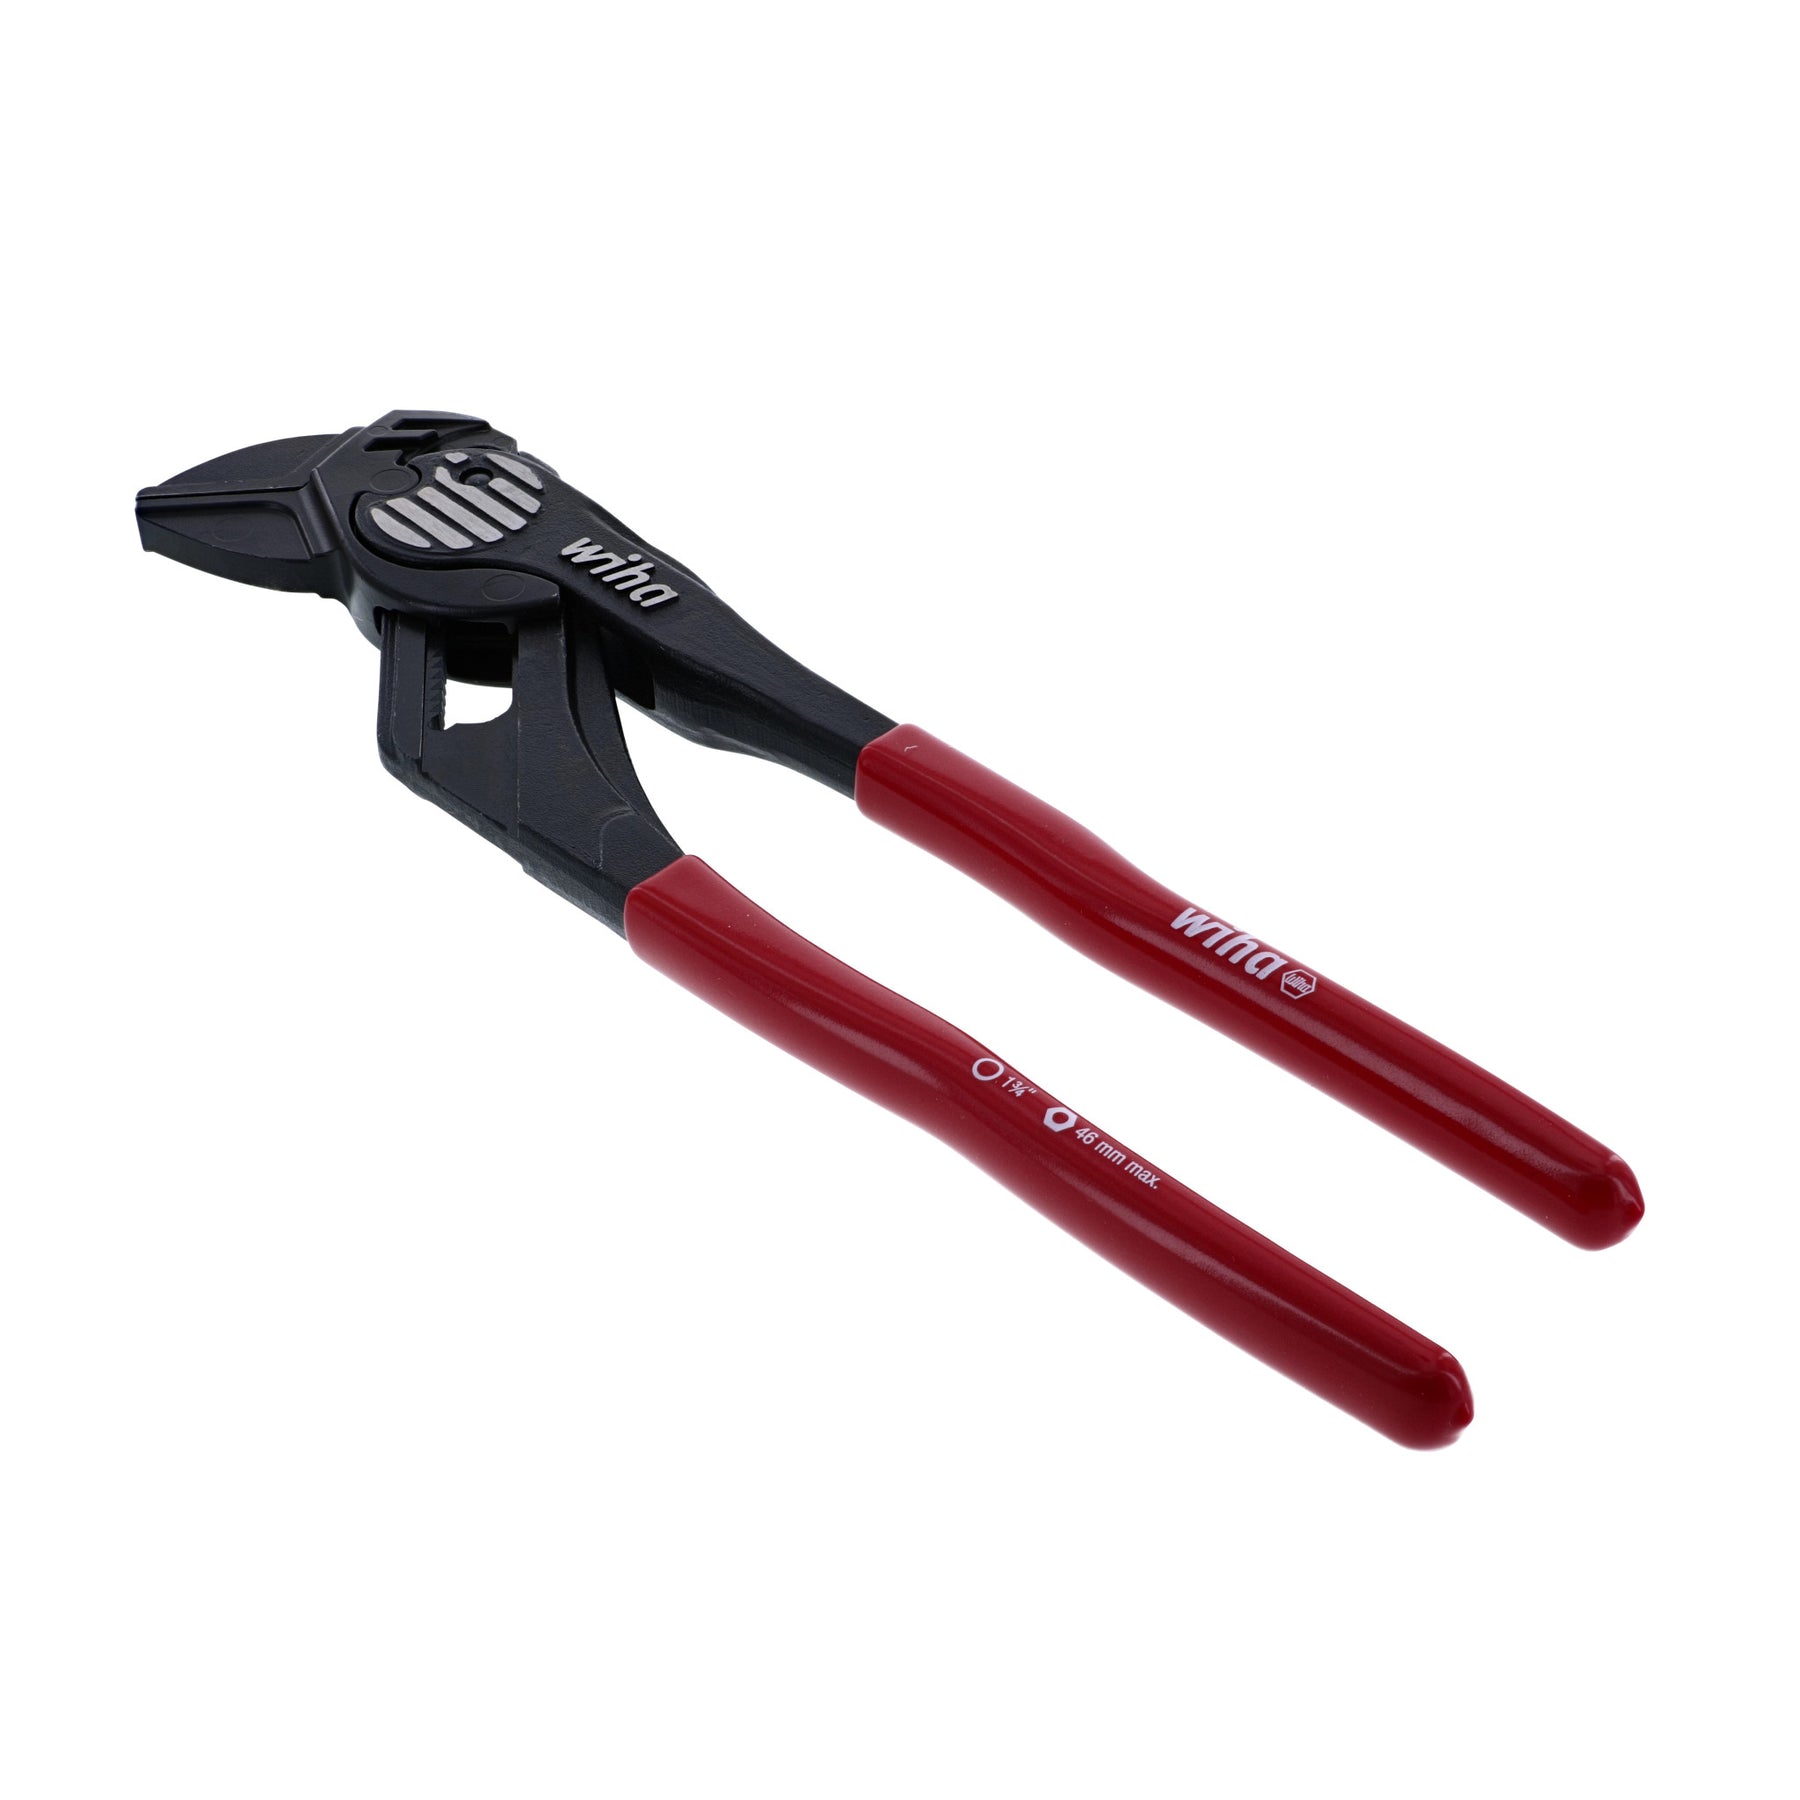 Wiha 10.25in Classic Grip Pliers Wrench - 32635